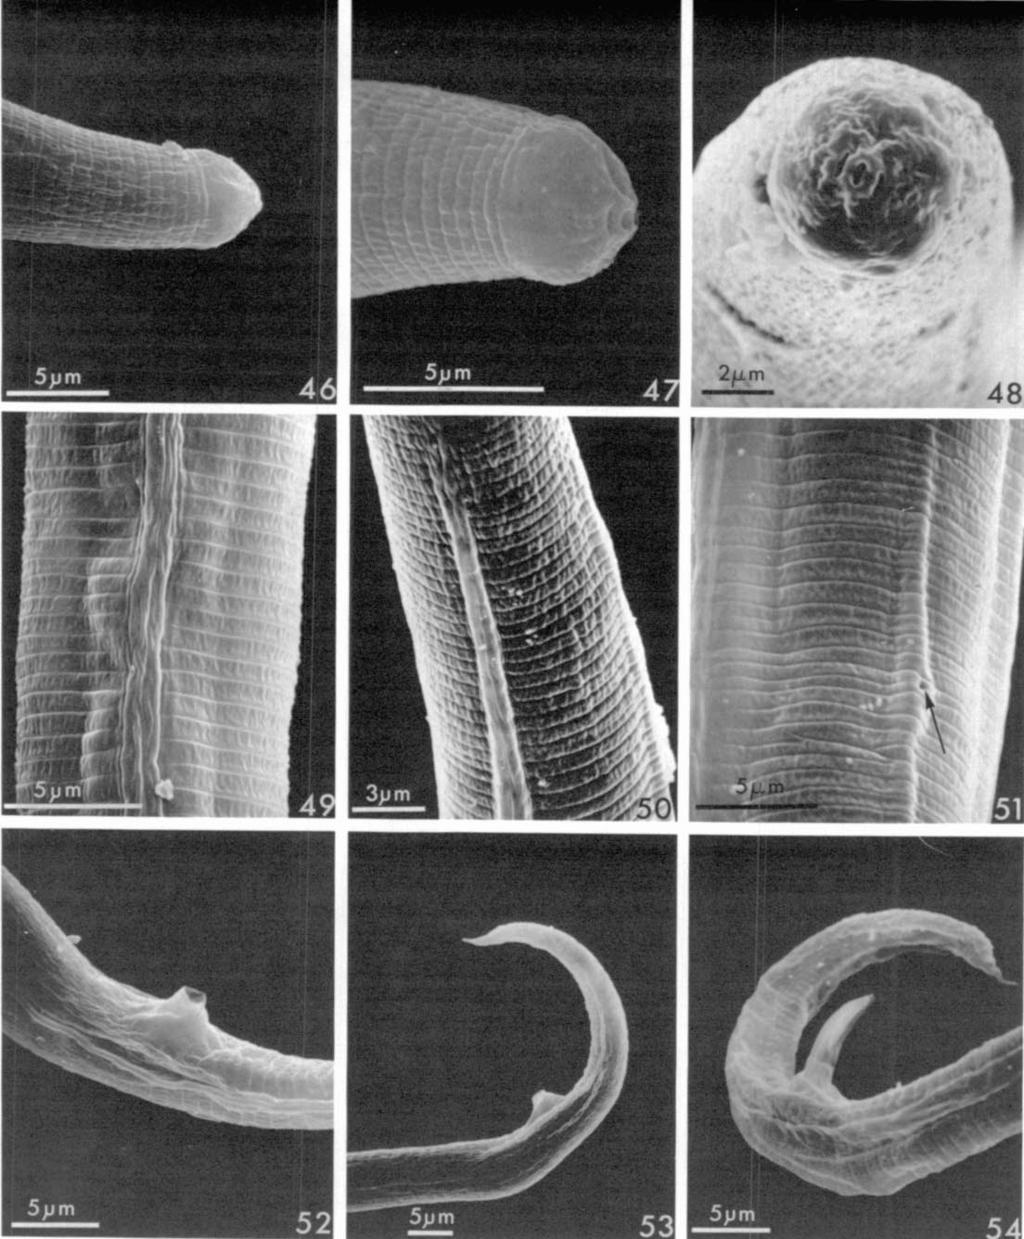 272 Journal of Nematology, Volume 16, No. 3, July 1984 ~o. \ ~" 's ~,.~,_~S,~,' j- 5,um 5~ FIGs. 46-54. SEM micrographs of males of Meloidoderita polygoni n. sp.